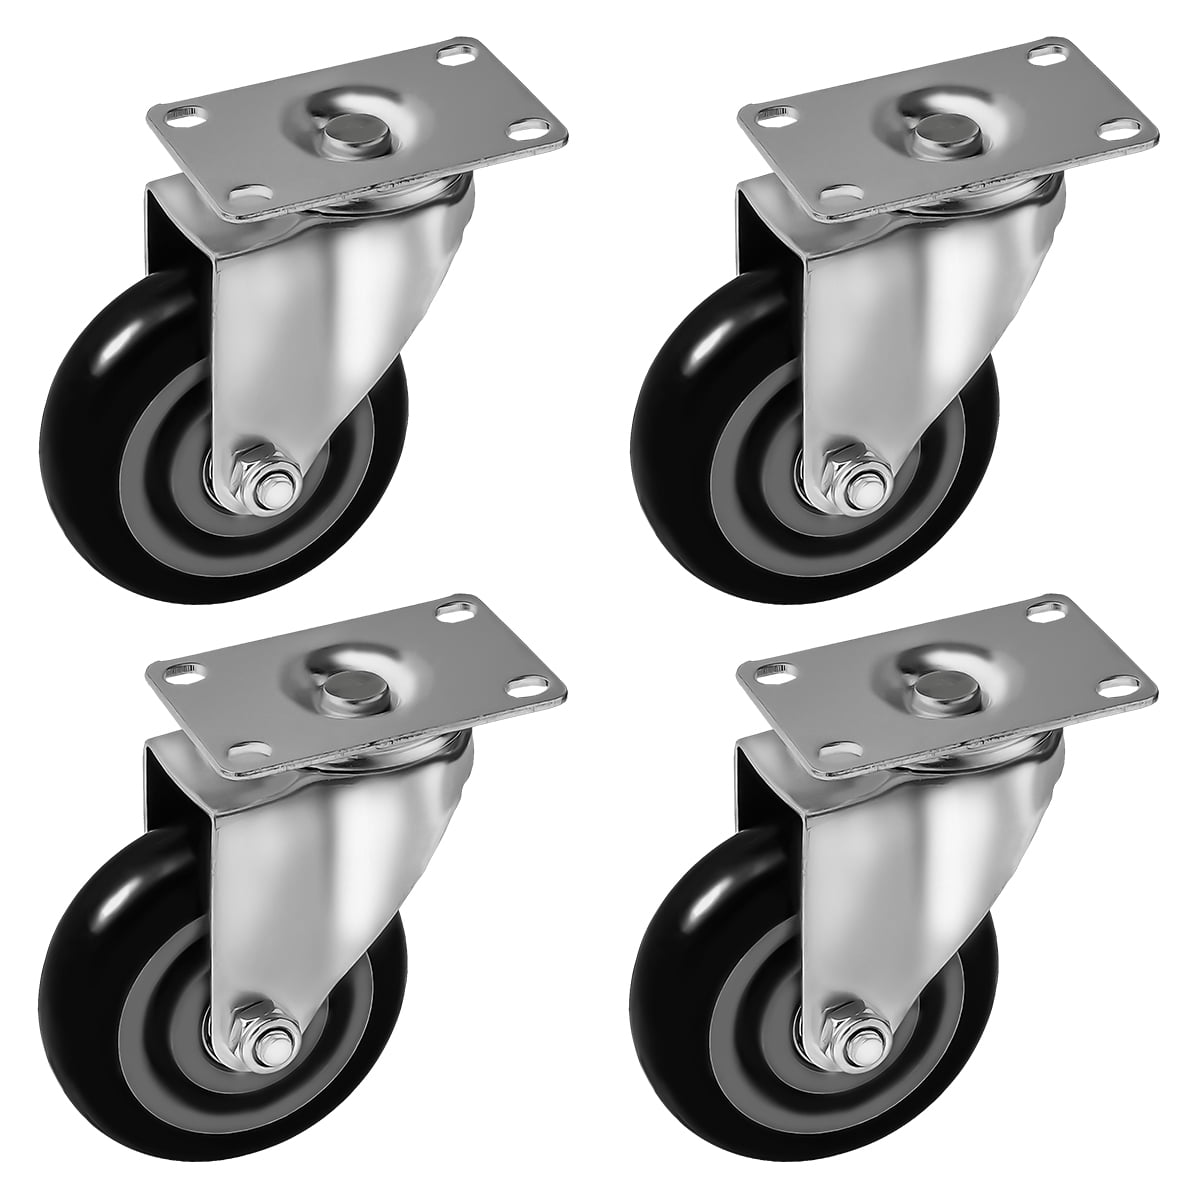 Color : Universal, Size : 75mm/3in Casters Castor Wheels Moving Wheels Heavy Duty Wheels for Furniture,Plate Trolley Wheels in Polyurethane,Double Bearing,with Screws,4 Pcs 